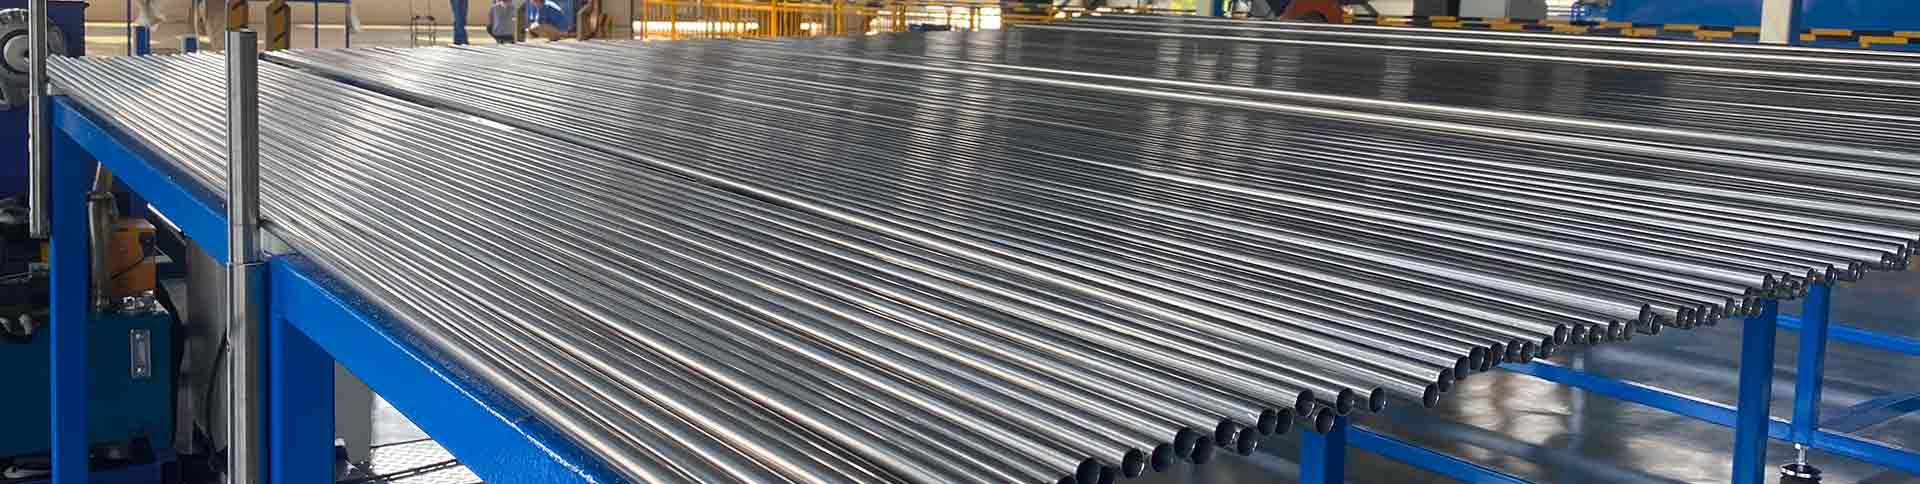 What Are the Differences Between 316L Stainless Steel Pipe and 316 Stainless Steel Pipe?